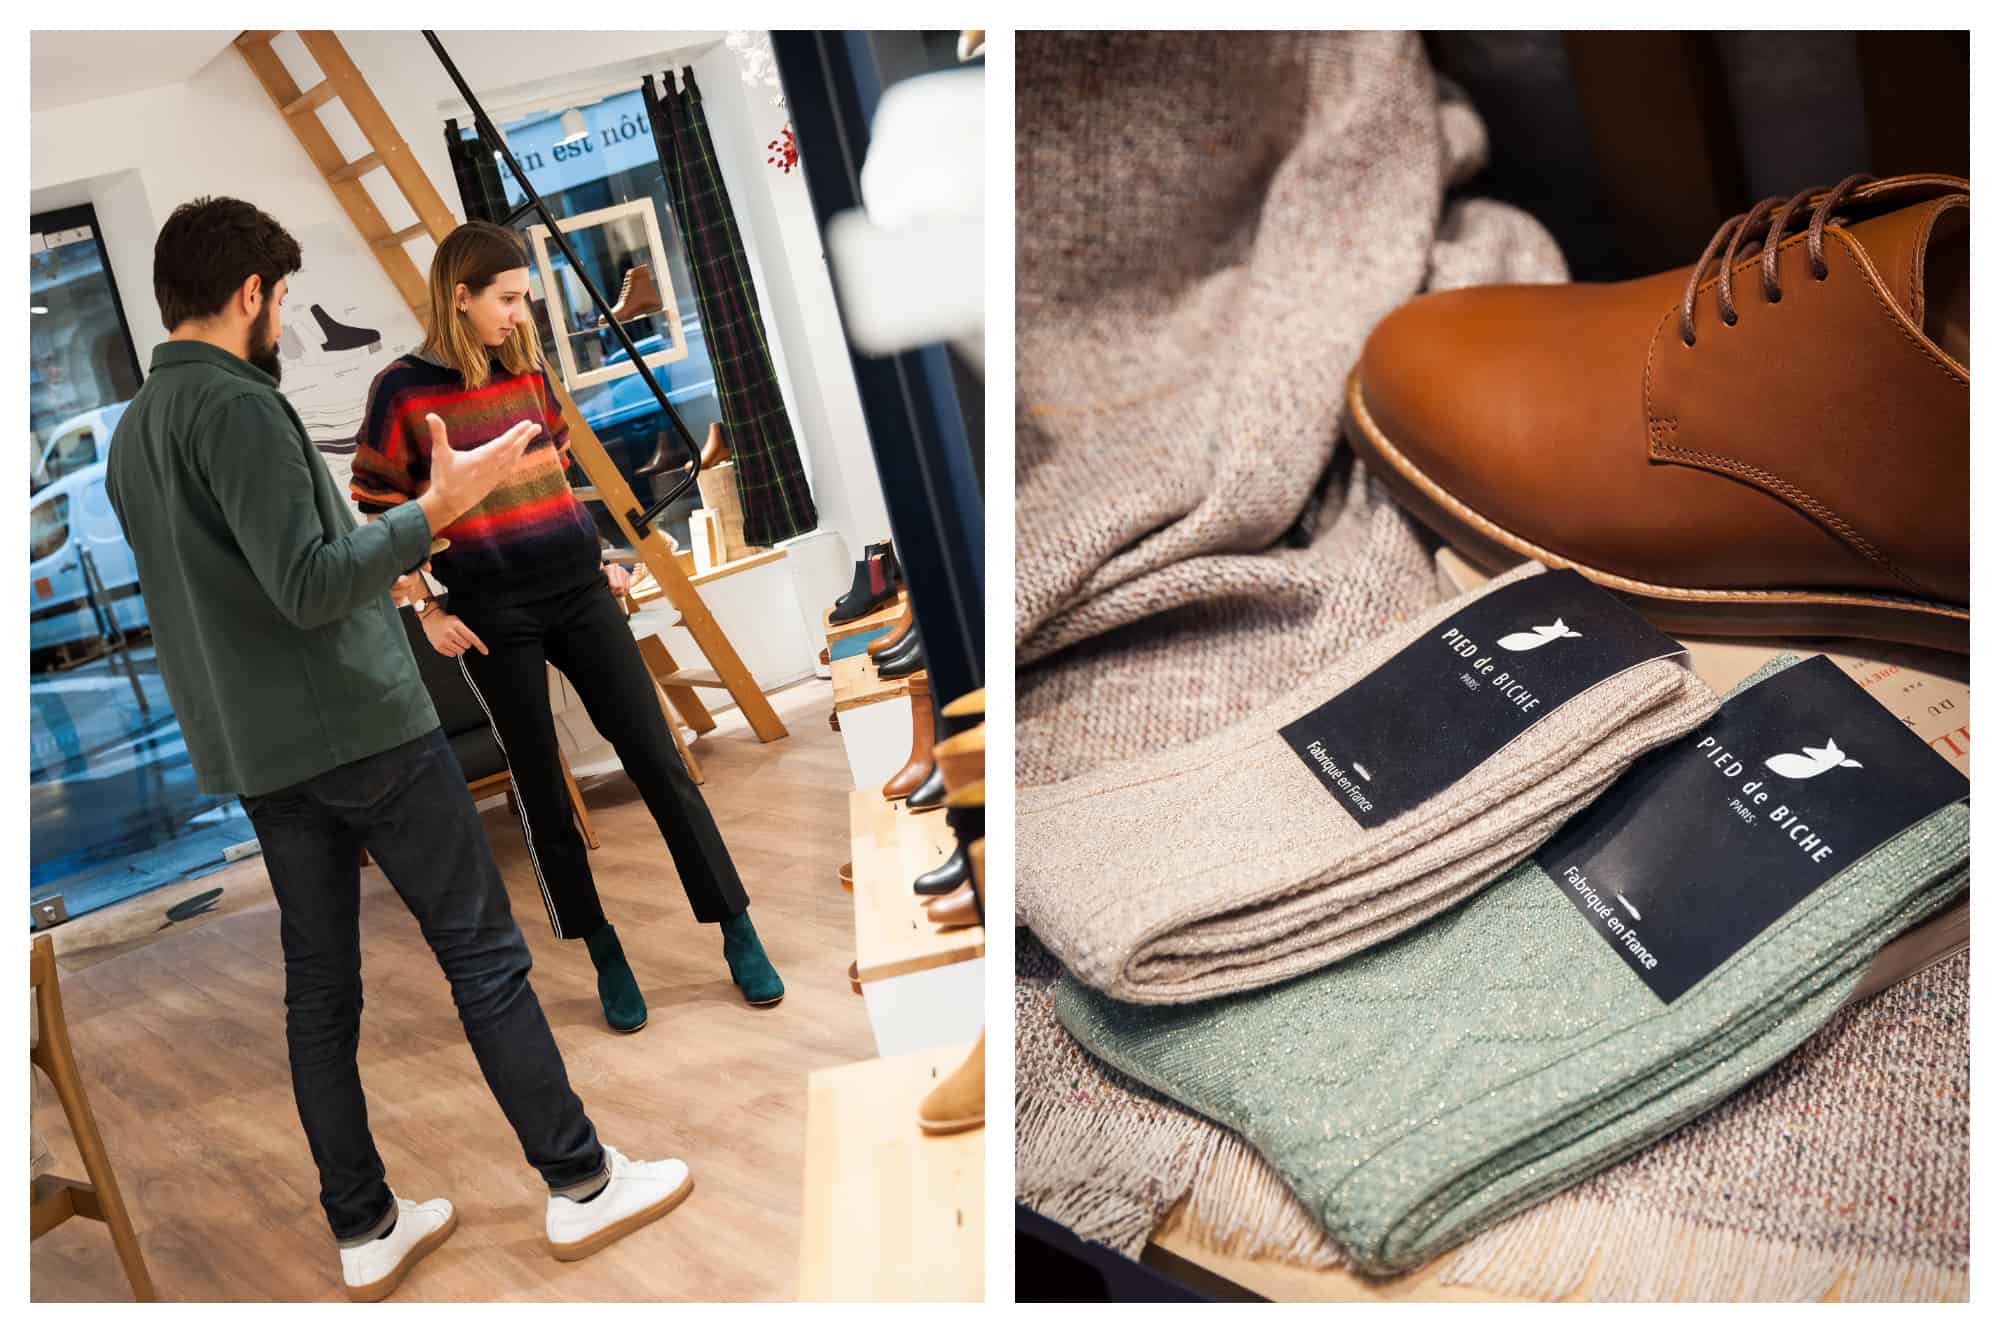 Shop attendant and customer are picking shoes out together at Pied de Biche store in Paris (left). They also have accessories like these olive green and beige socks (right).